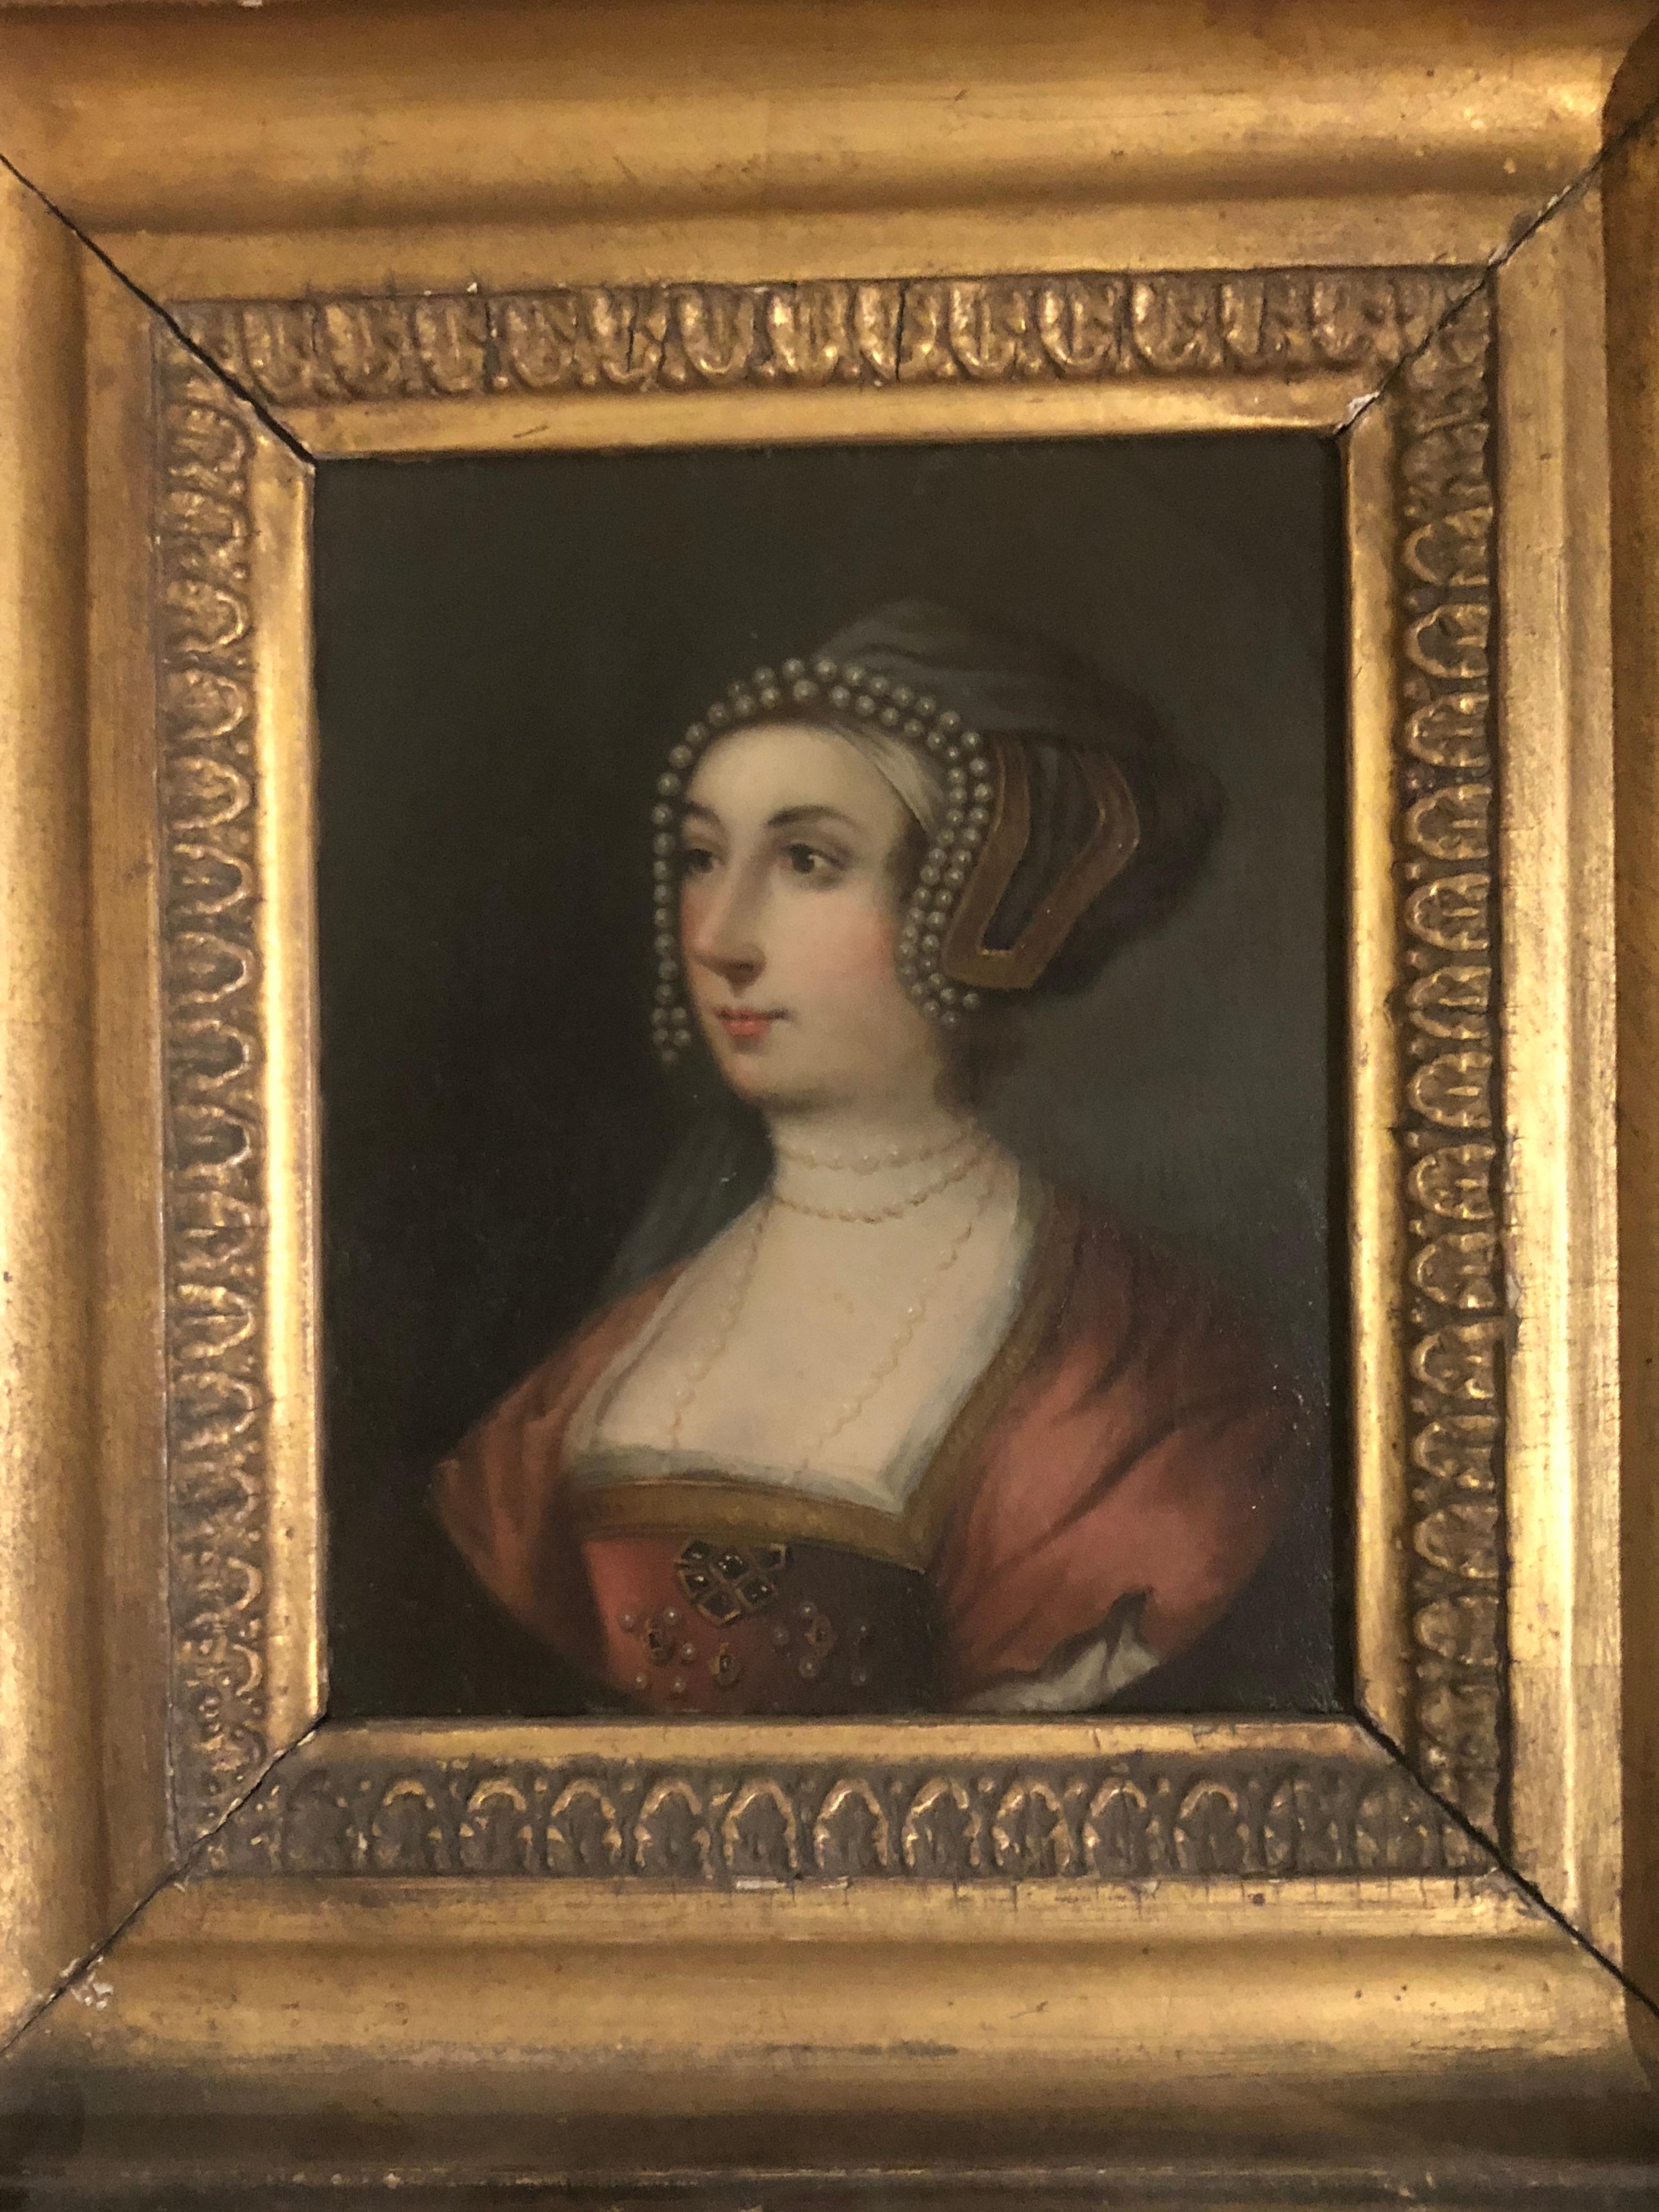 An Exquisite and Rare Portrait of Ann Boleyn (circa 1500-1536), Queen of England - Painting by Unknown